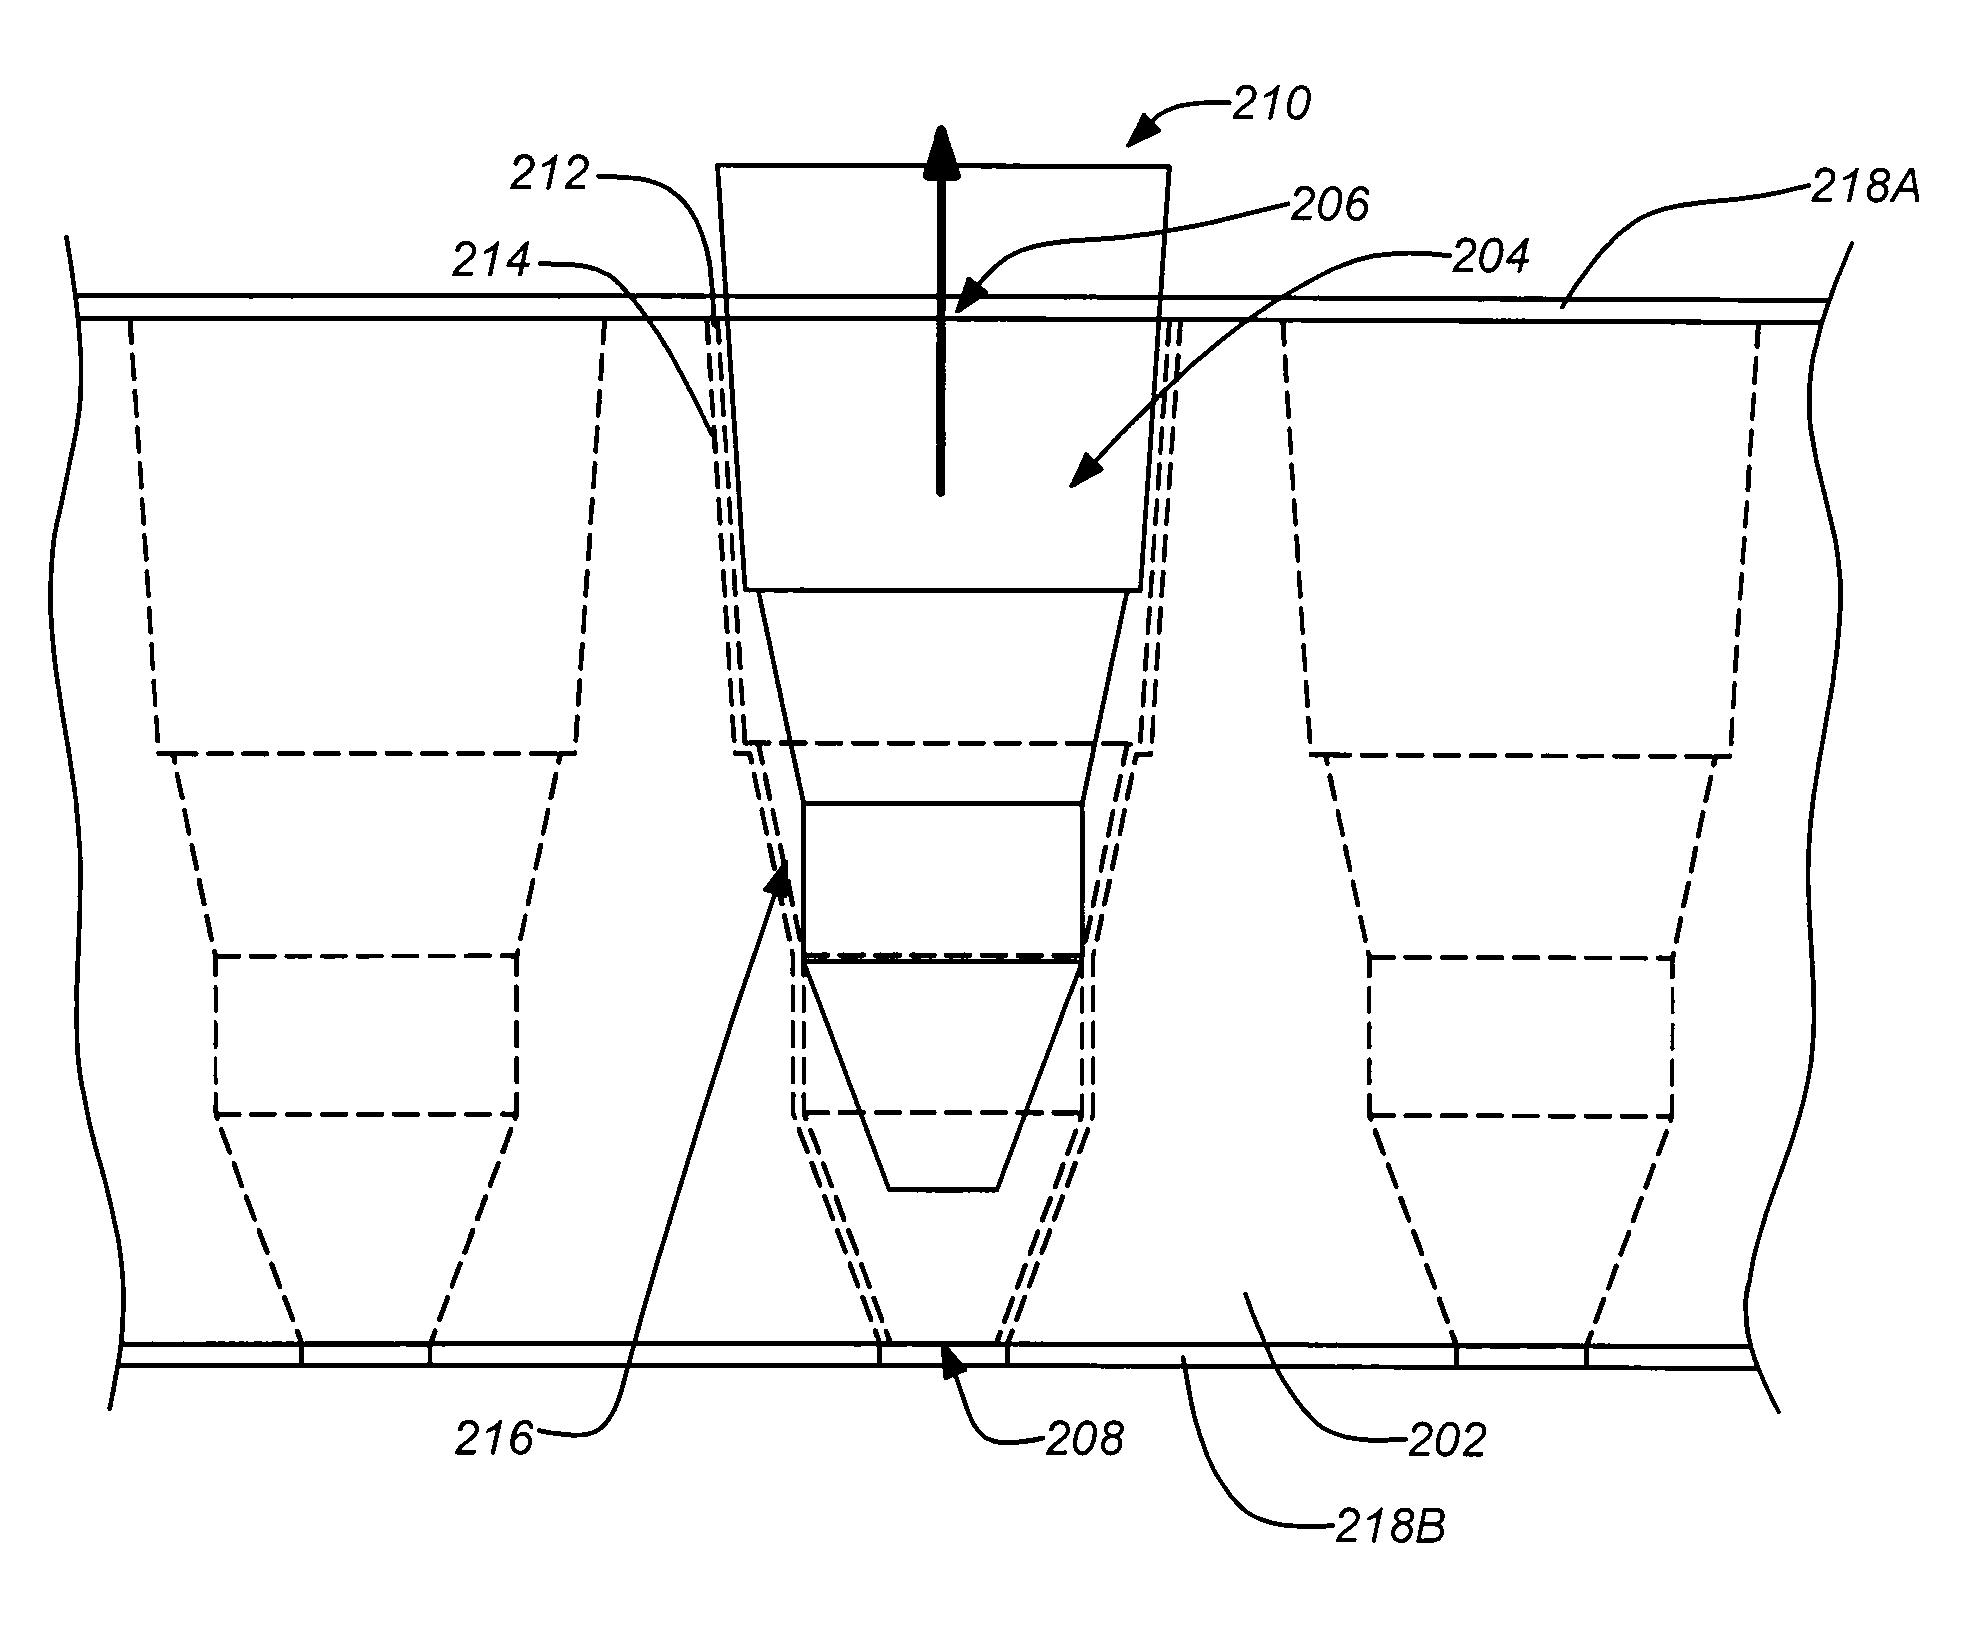 Structural feed aperture for space based phased array antennas